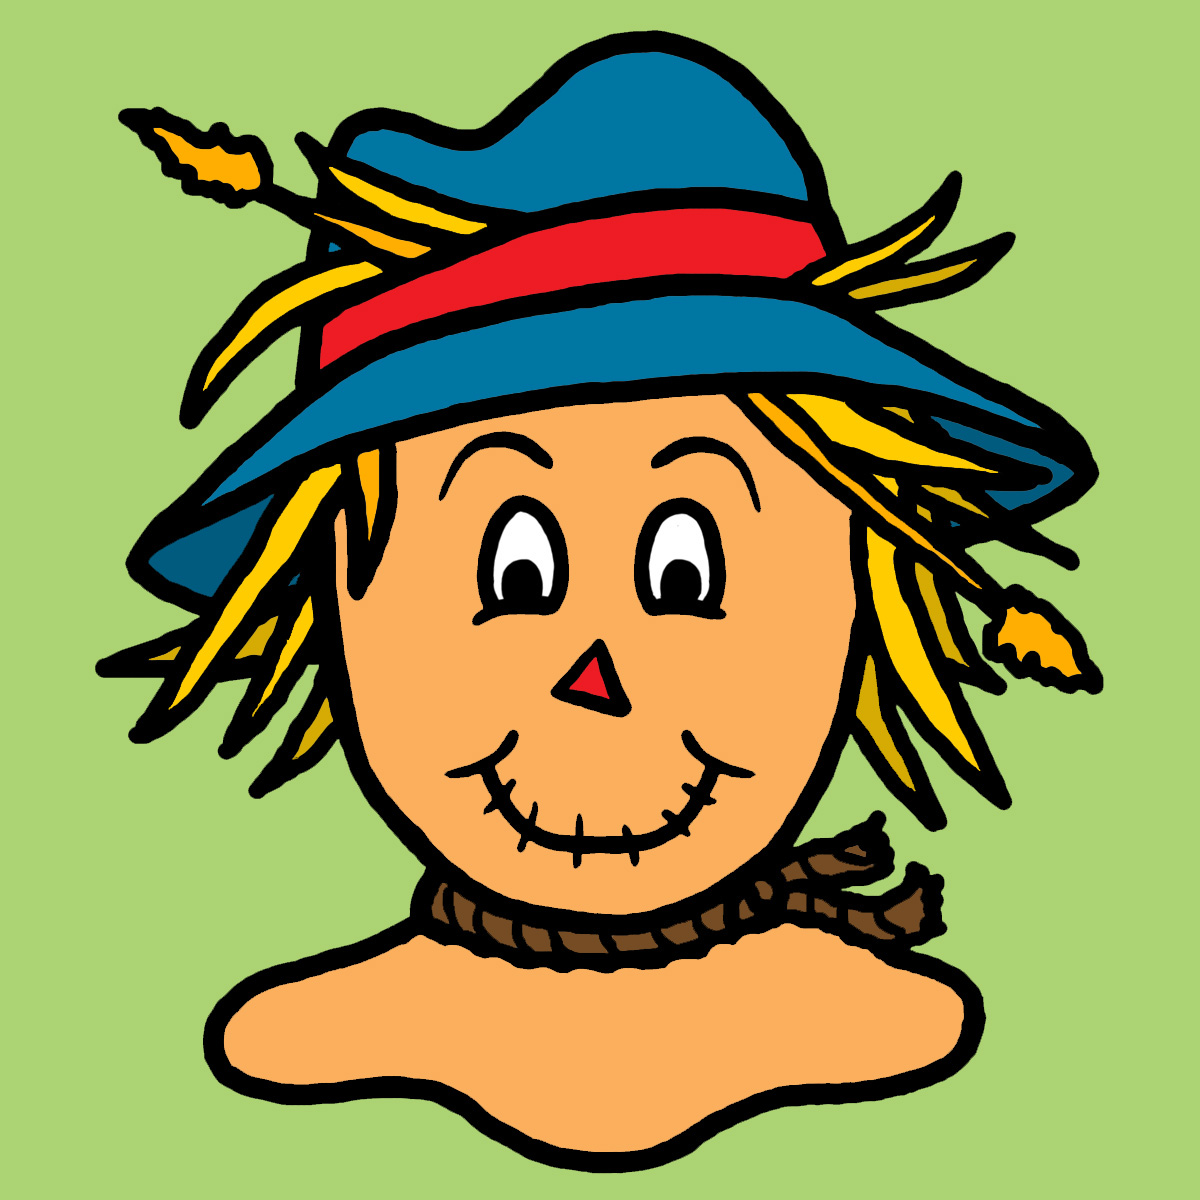 Free Scarecrow Thinking Cliparts, Download Free Clip Art, Free Clip Art